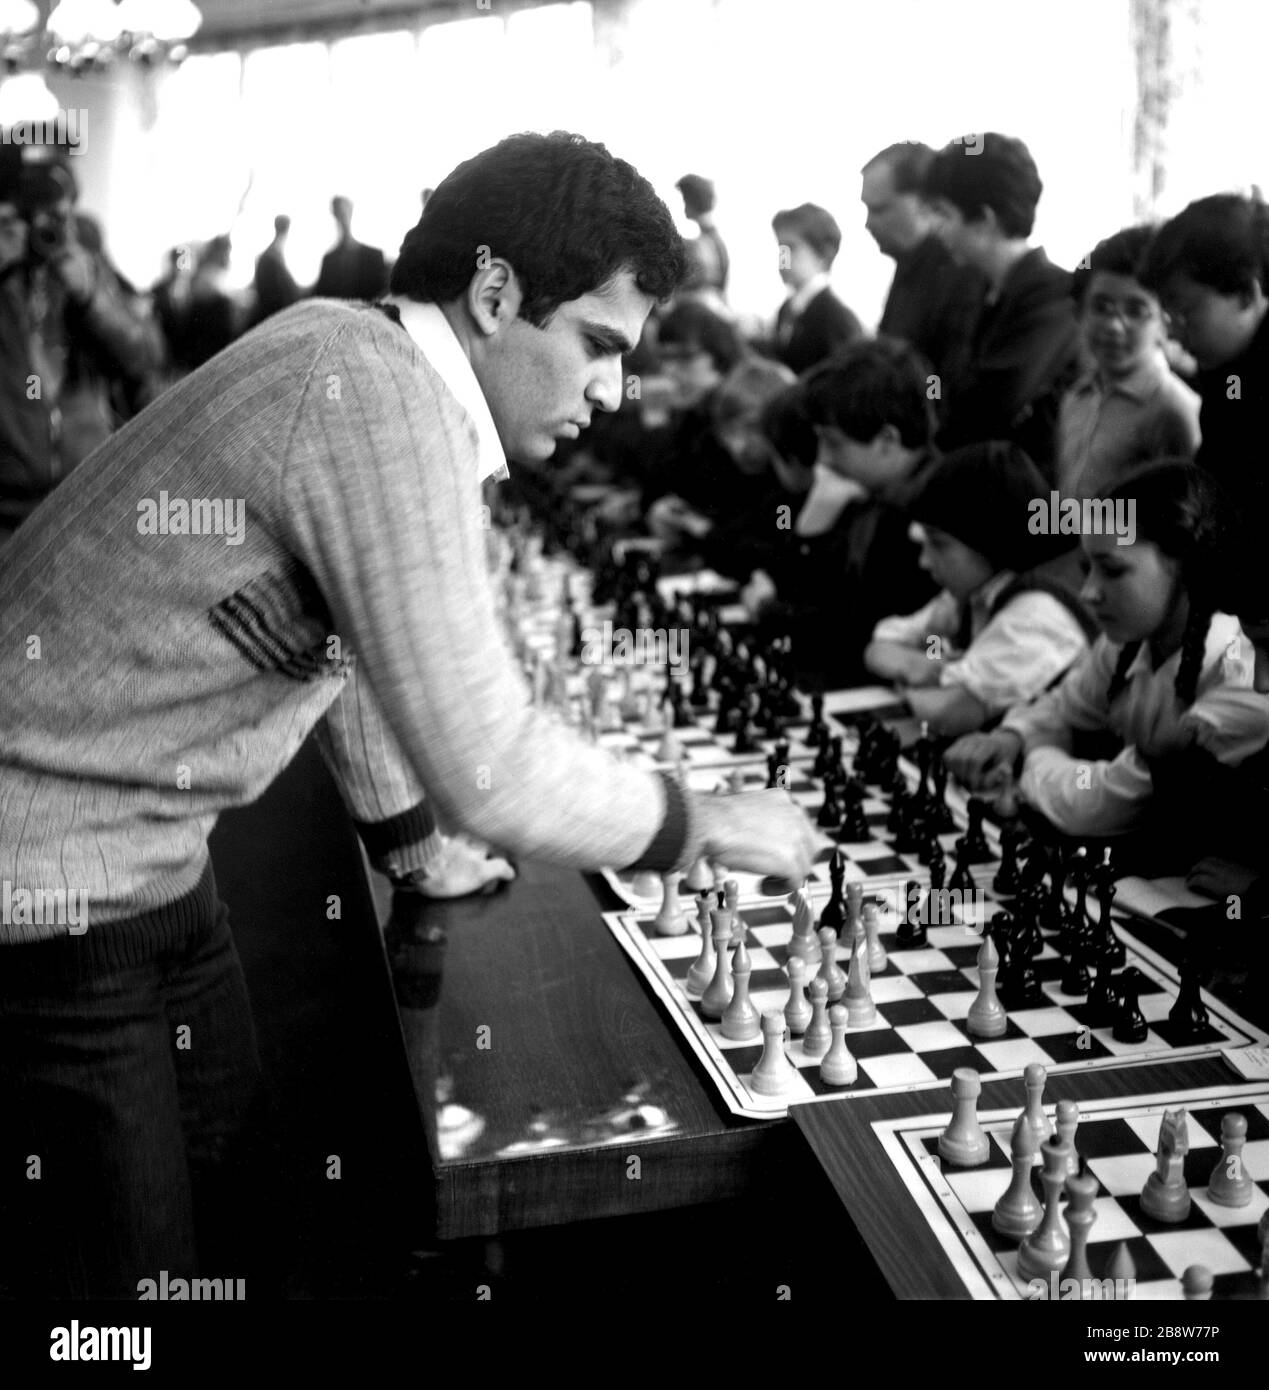 A Cunning Chess Opening for Black - Lure Your Opponent into the Philidor  Swamp! : Sergey Kasparov : Free Download, Borrow, and Streaming : Internet  Archive